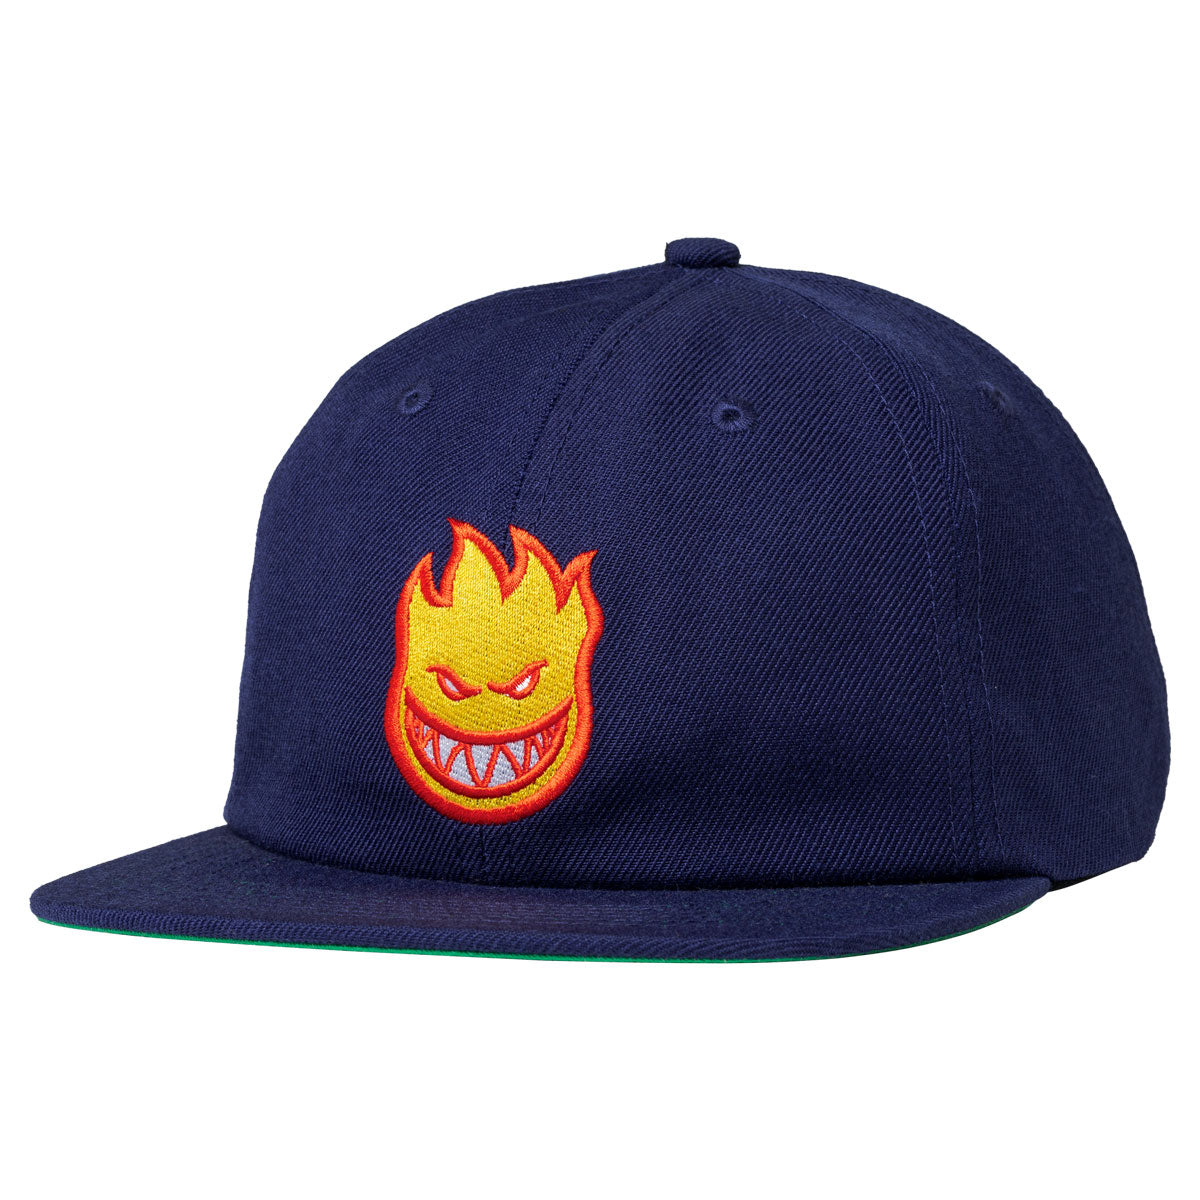 Spitfire Lil Bighead Fill Strapback Hat - Navy/Red/Yellow image 1